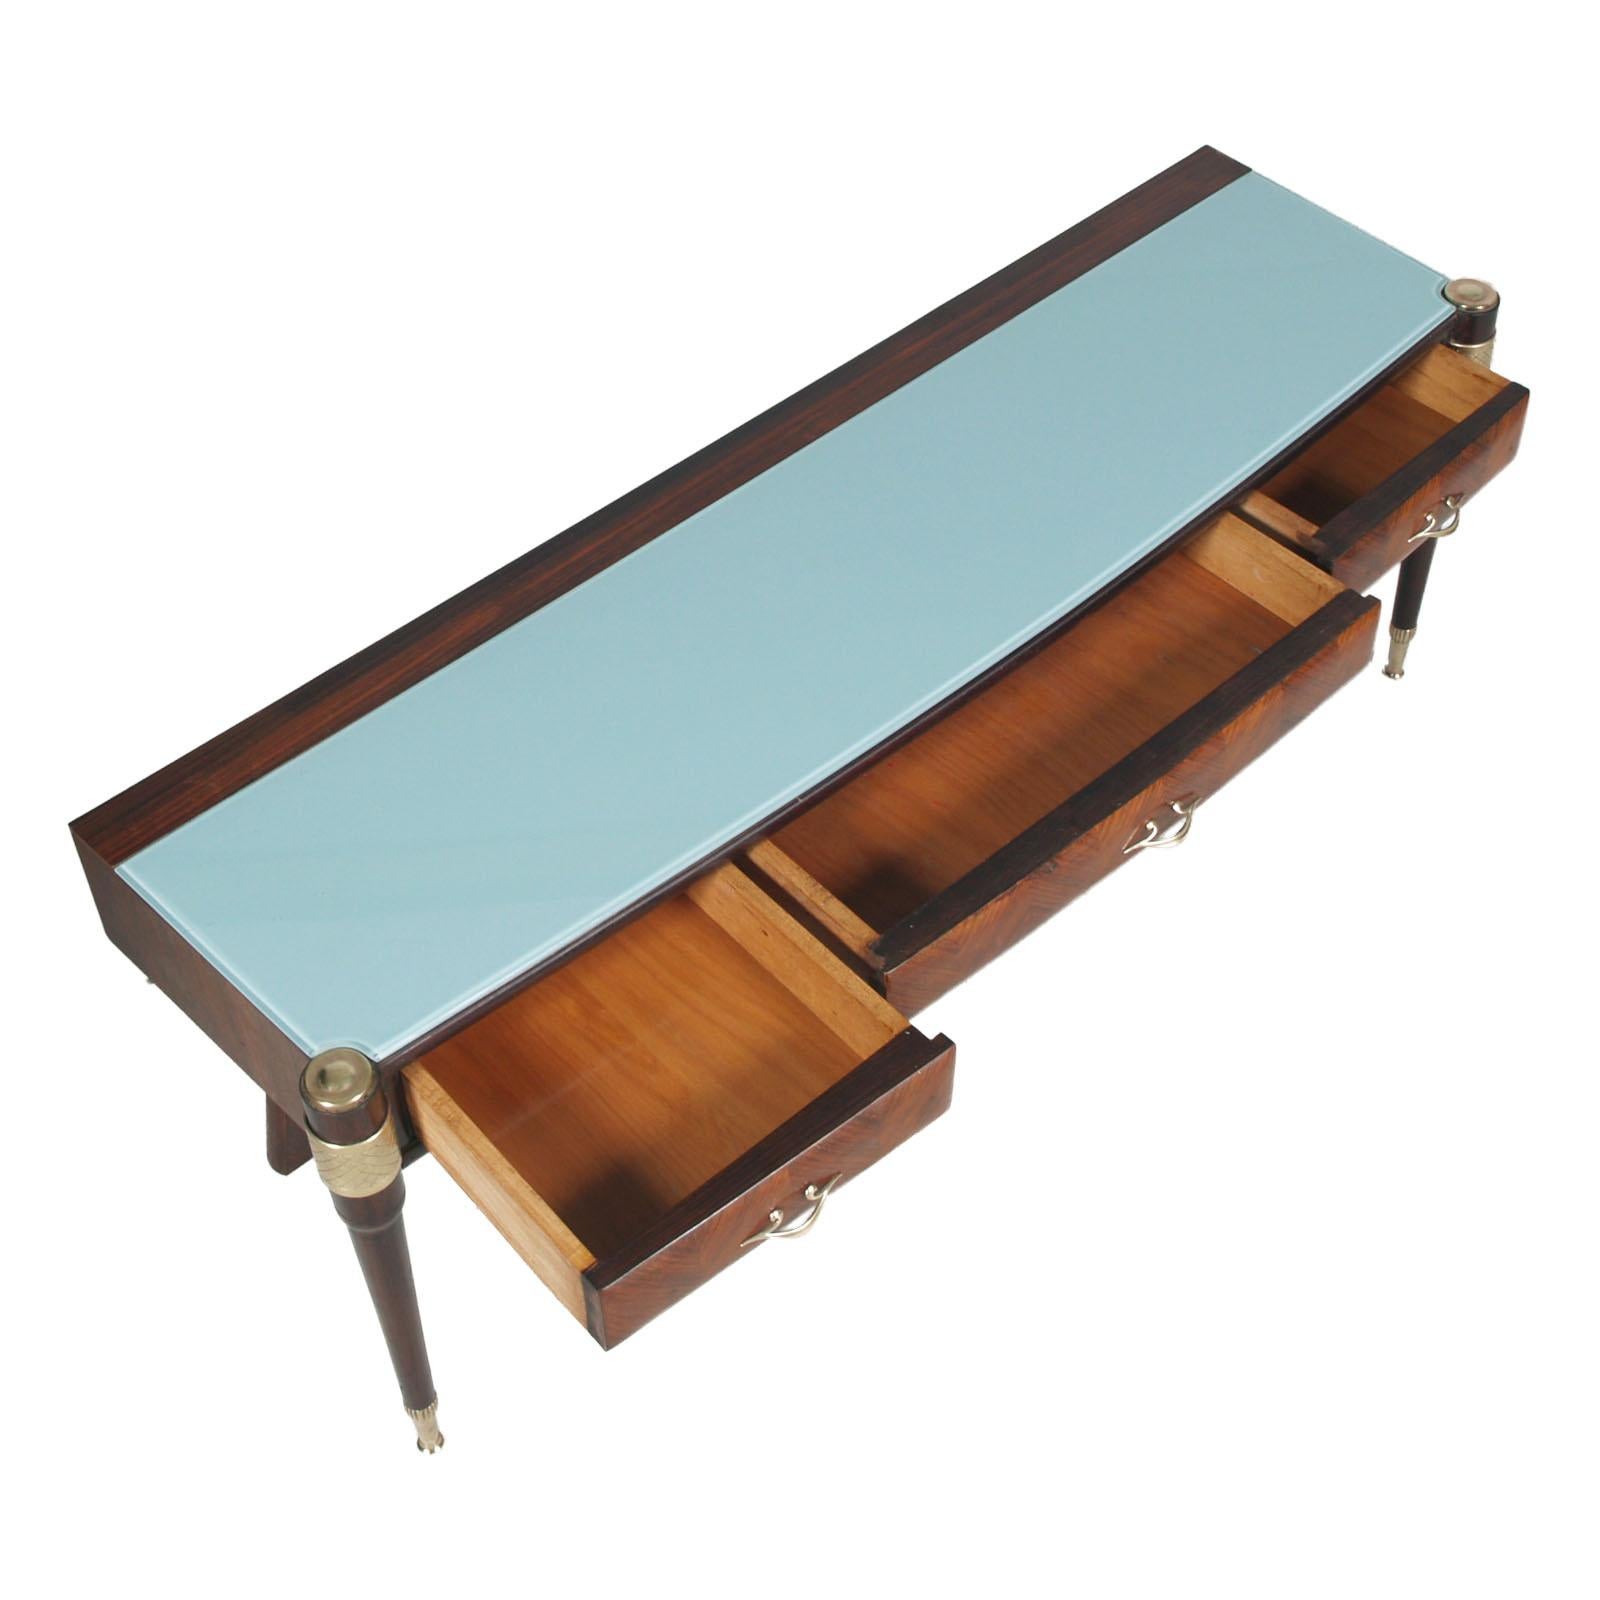 Gilt Mid-Century Modern Pier Luigi Colli Mirrored Console, Vanity, Italy, from Cantu For Sale